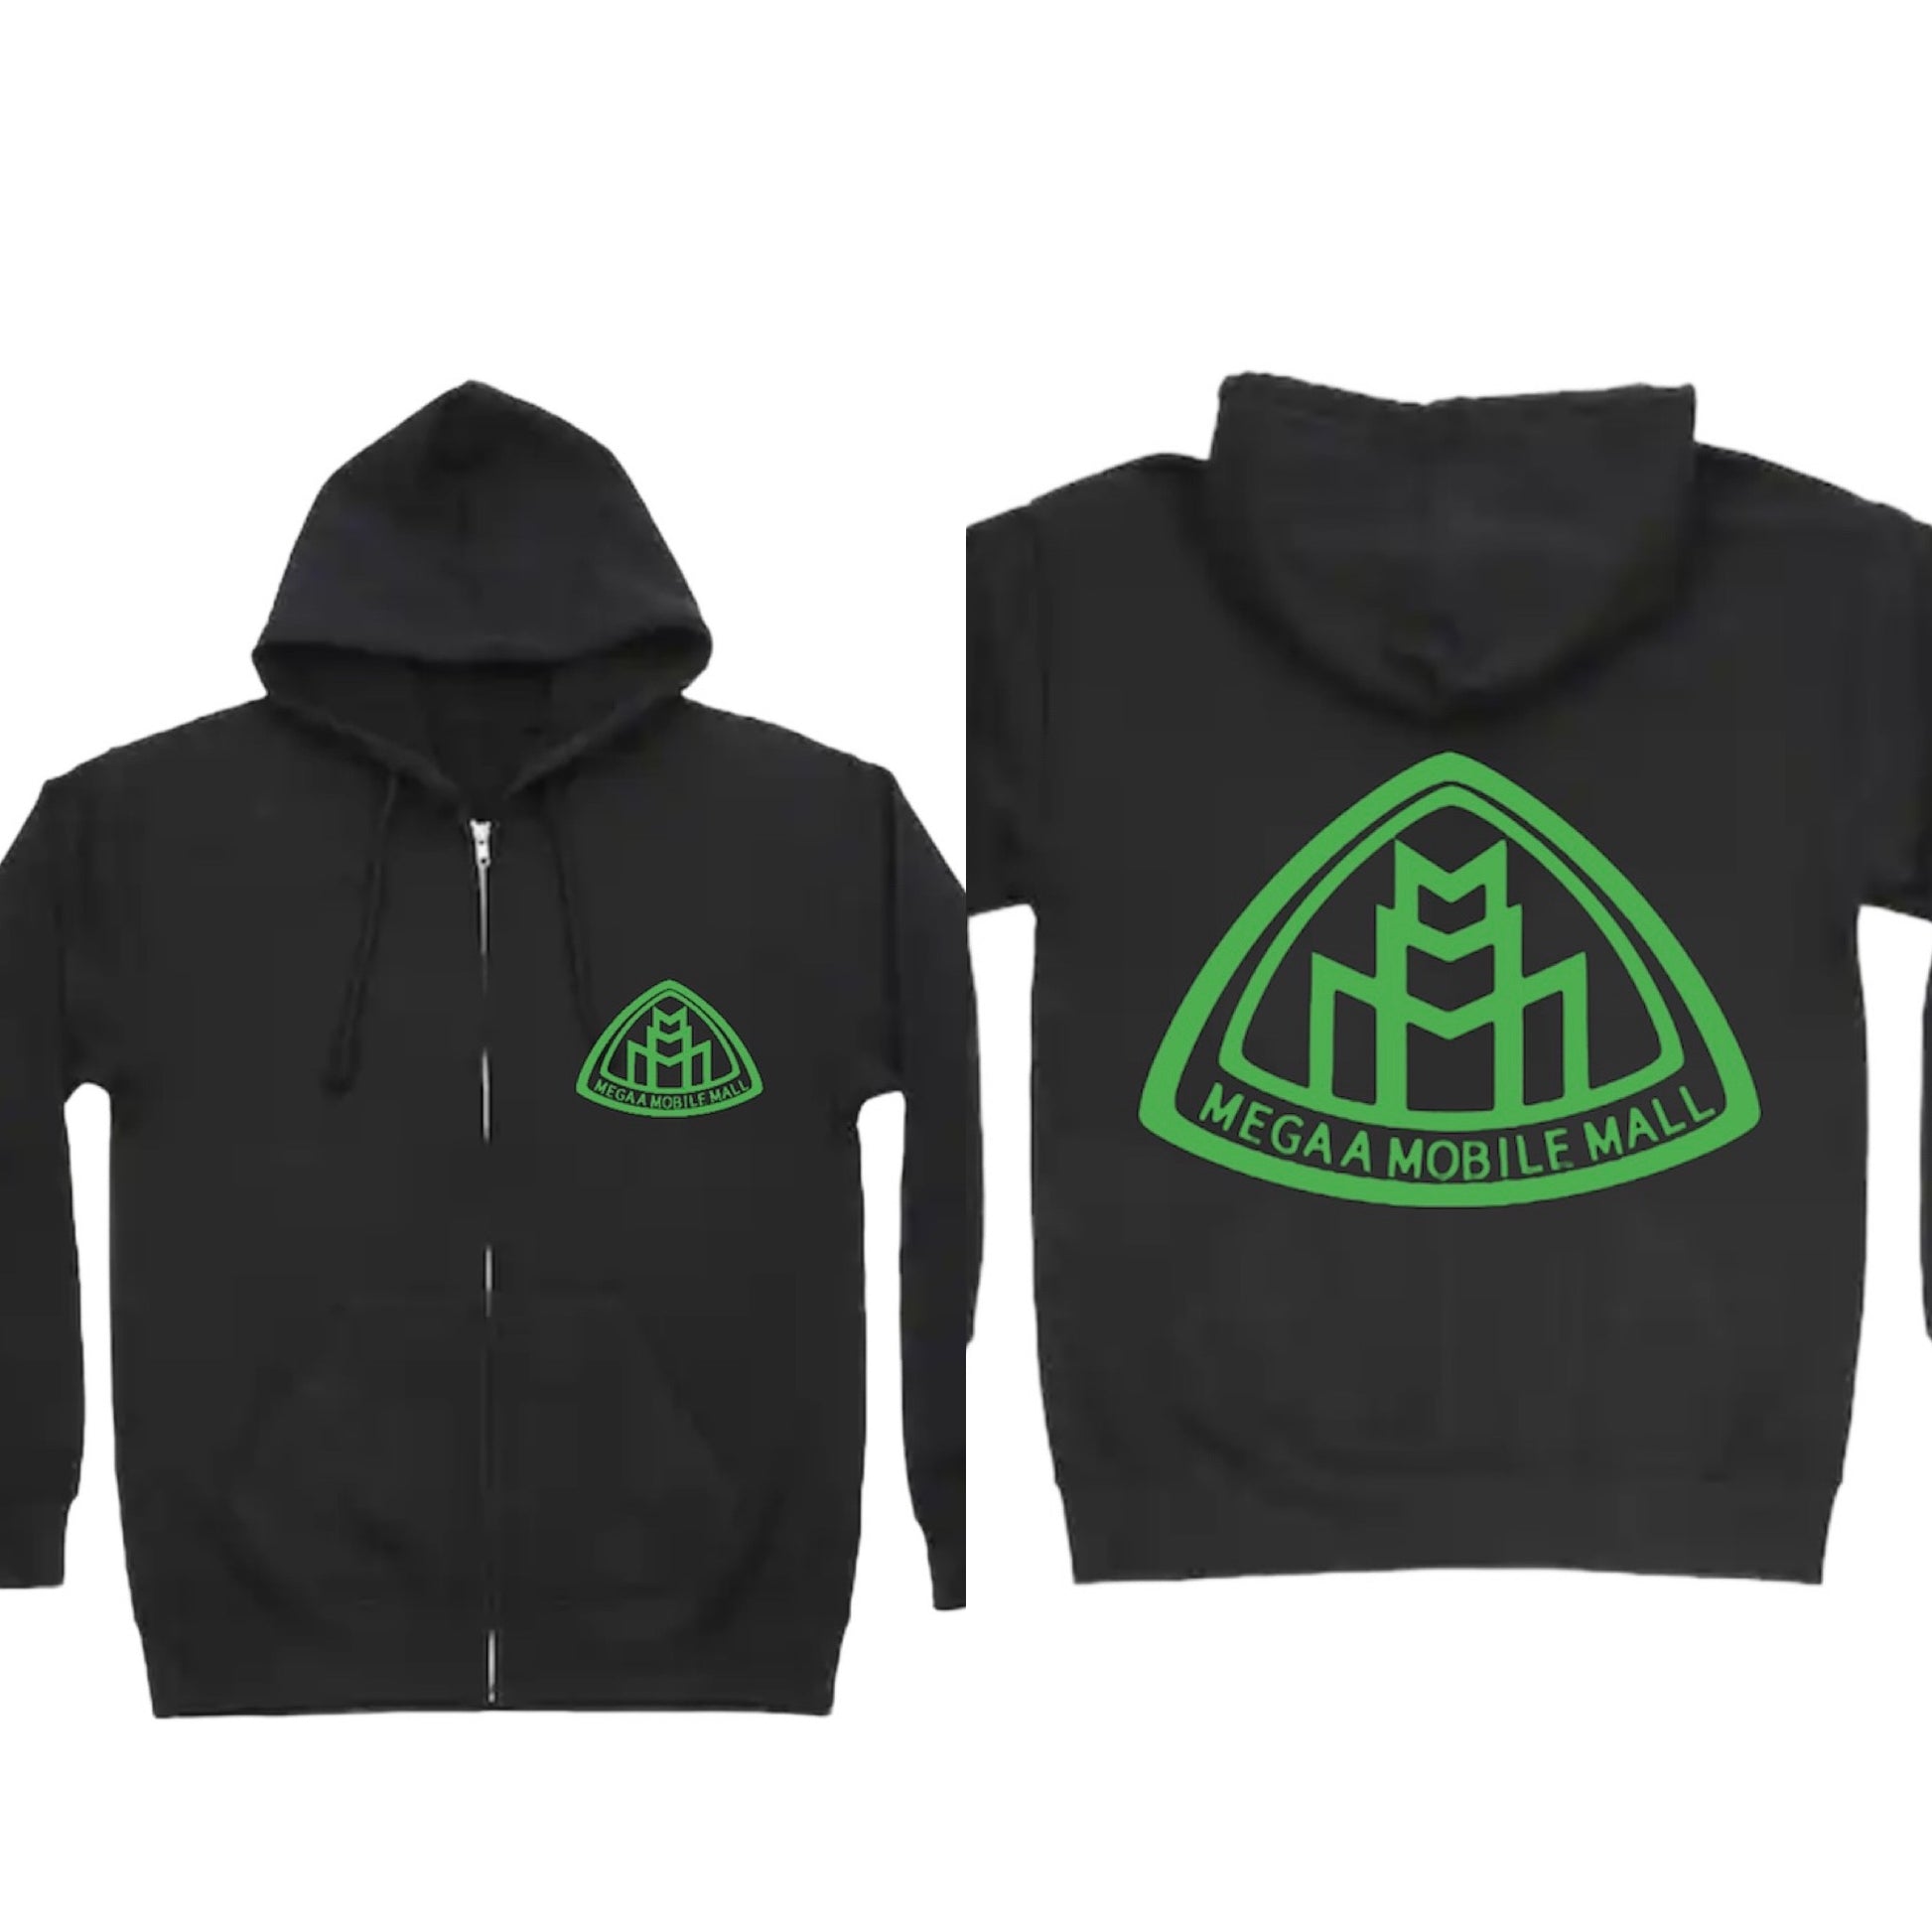 megaamobilemall black zip up hoodie with green logo color